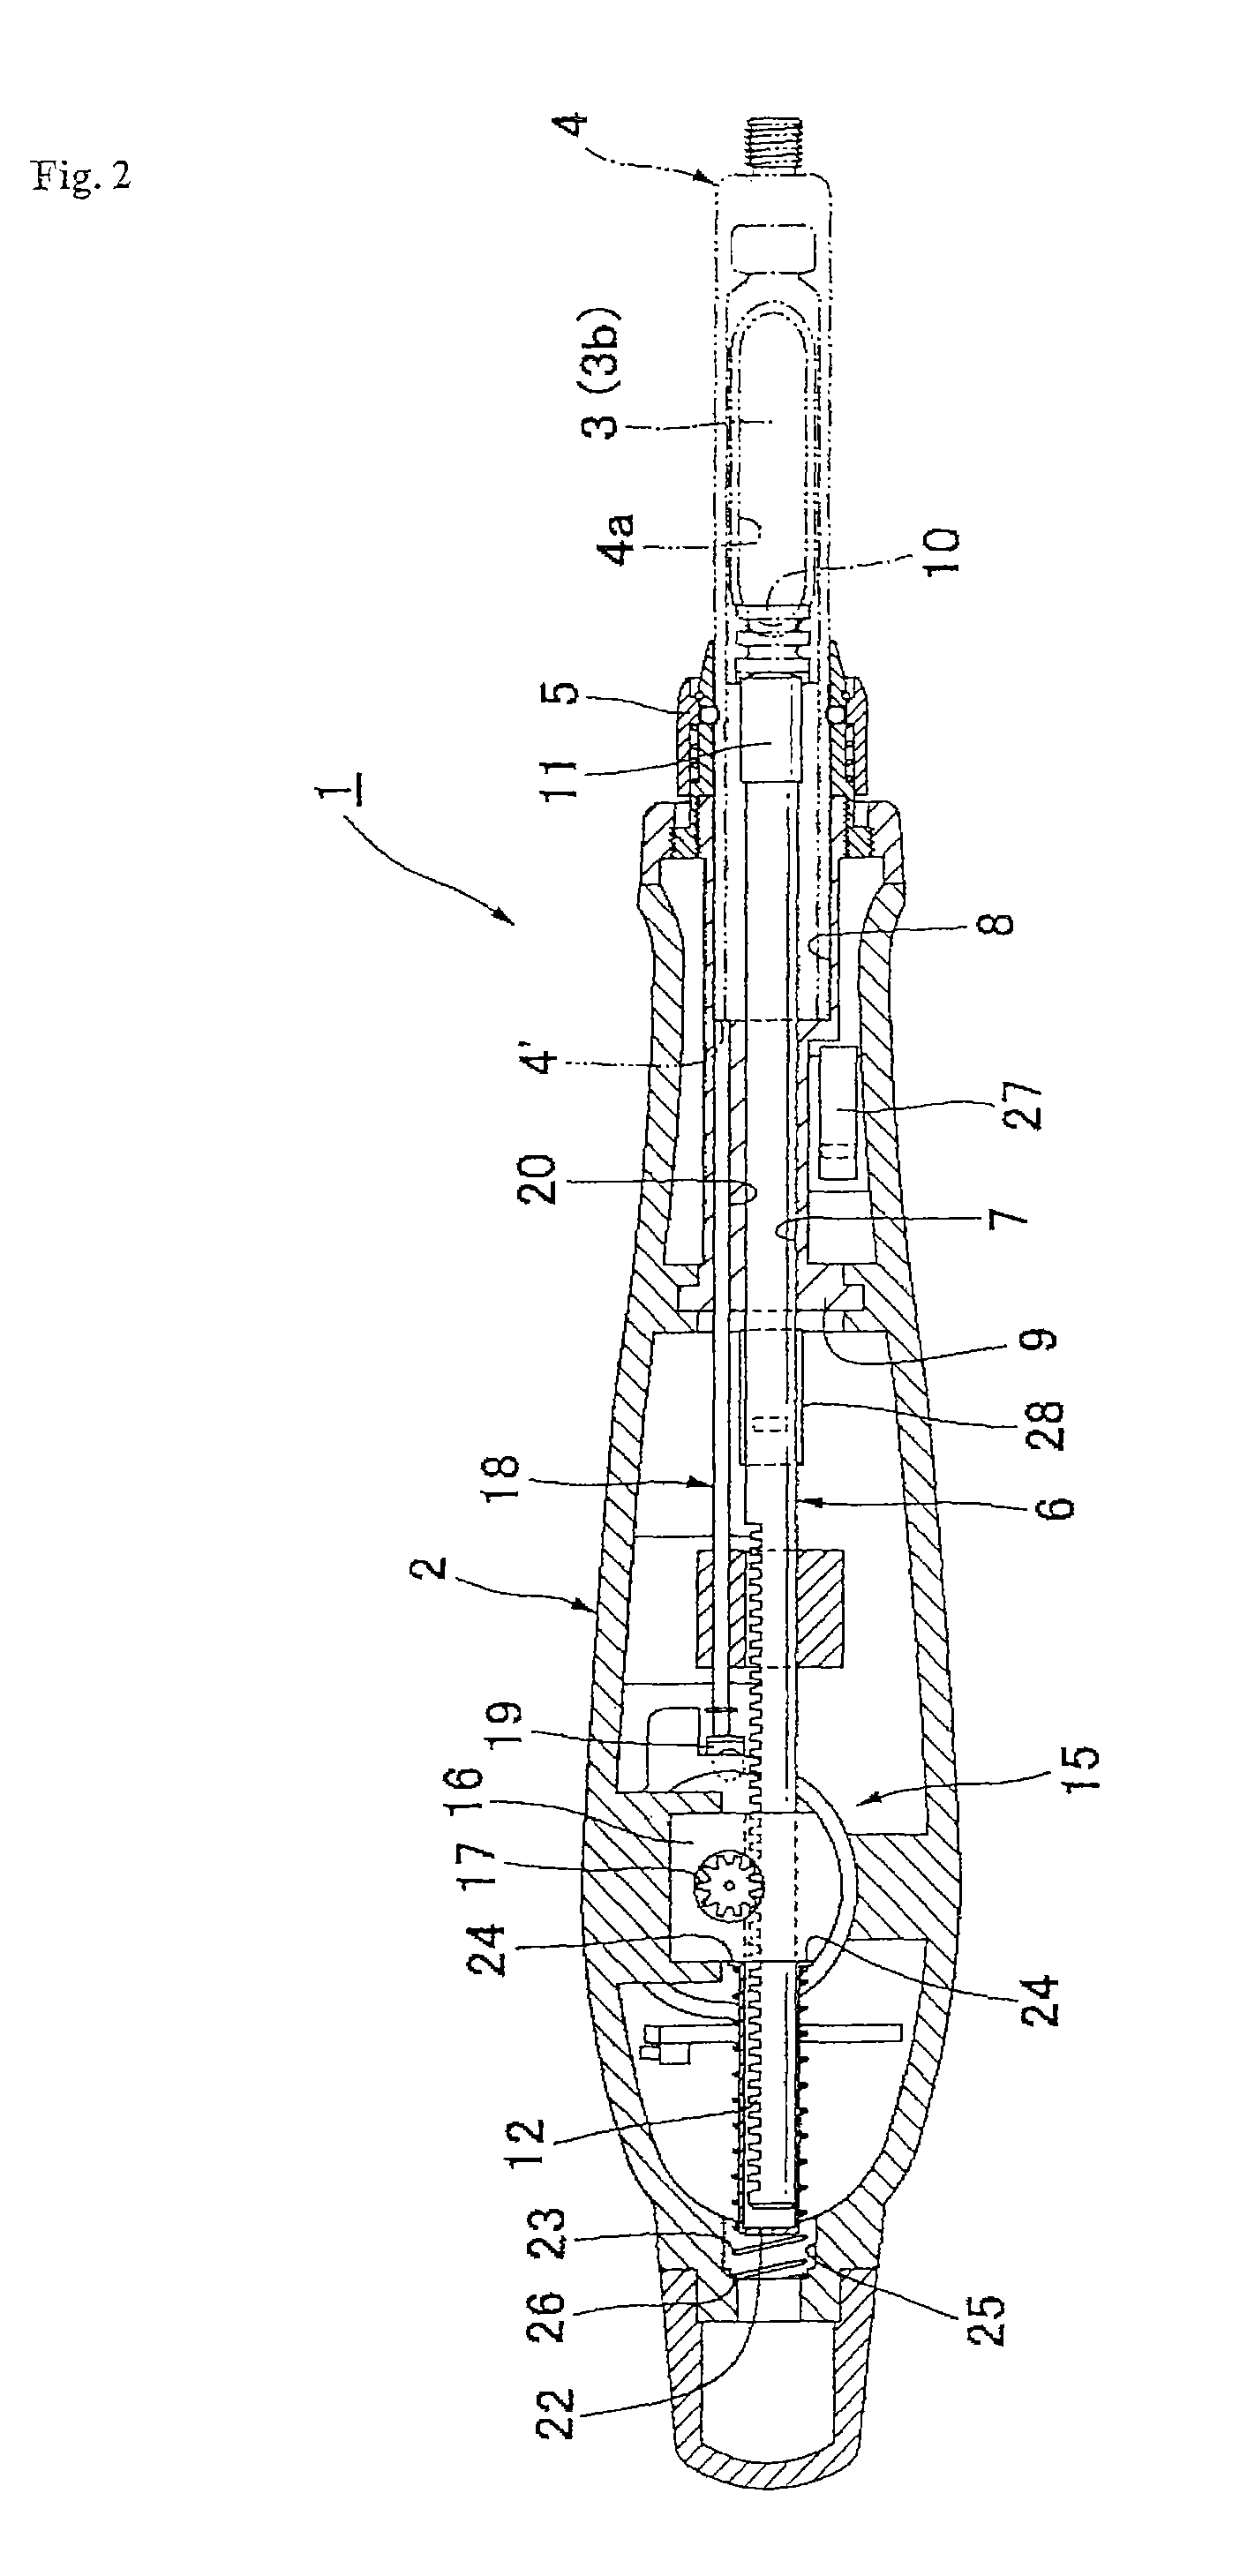 Motorized syringe for use with two types of dental anesthetic solution-containing cartridges